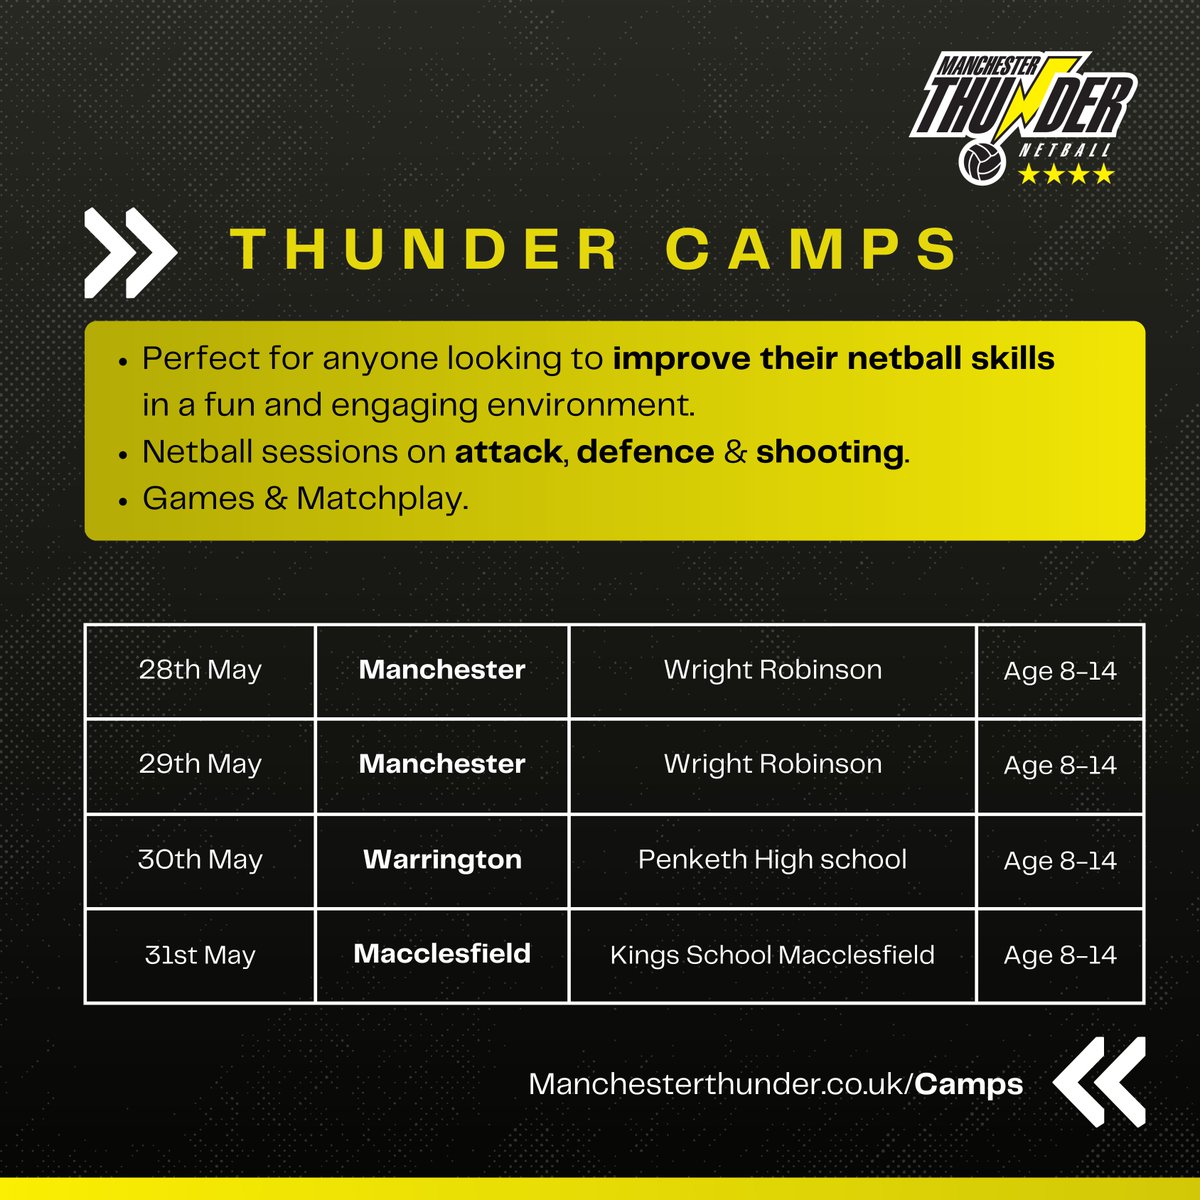 Thunder Netball Camps coming this month 🤩 Make sure to secure your spot before they sell out! ✅ Manchester ✅ Macclesfield ✅ Warrington Head to the camps section of our website or click the link for more info 🎫 manchesterthunder.co.uk/thunder-netbal…